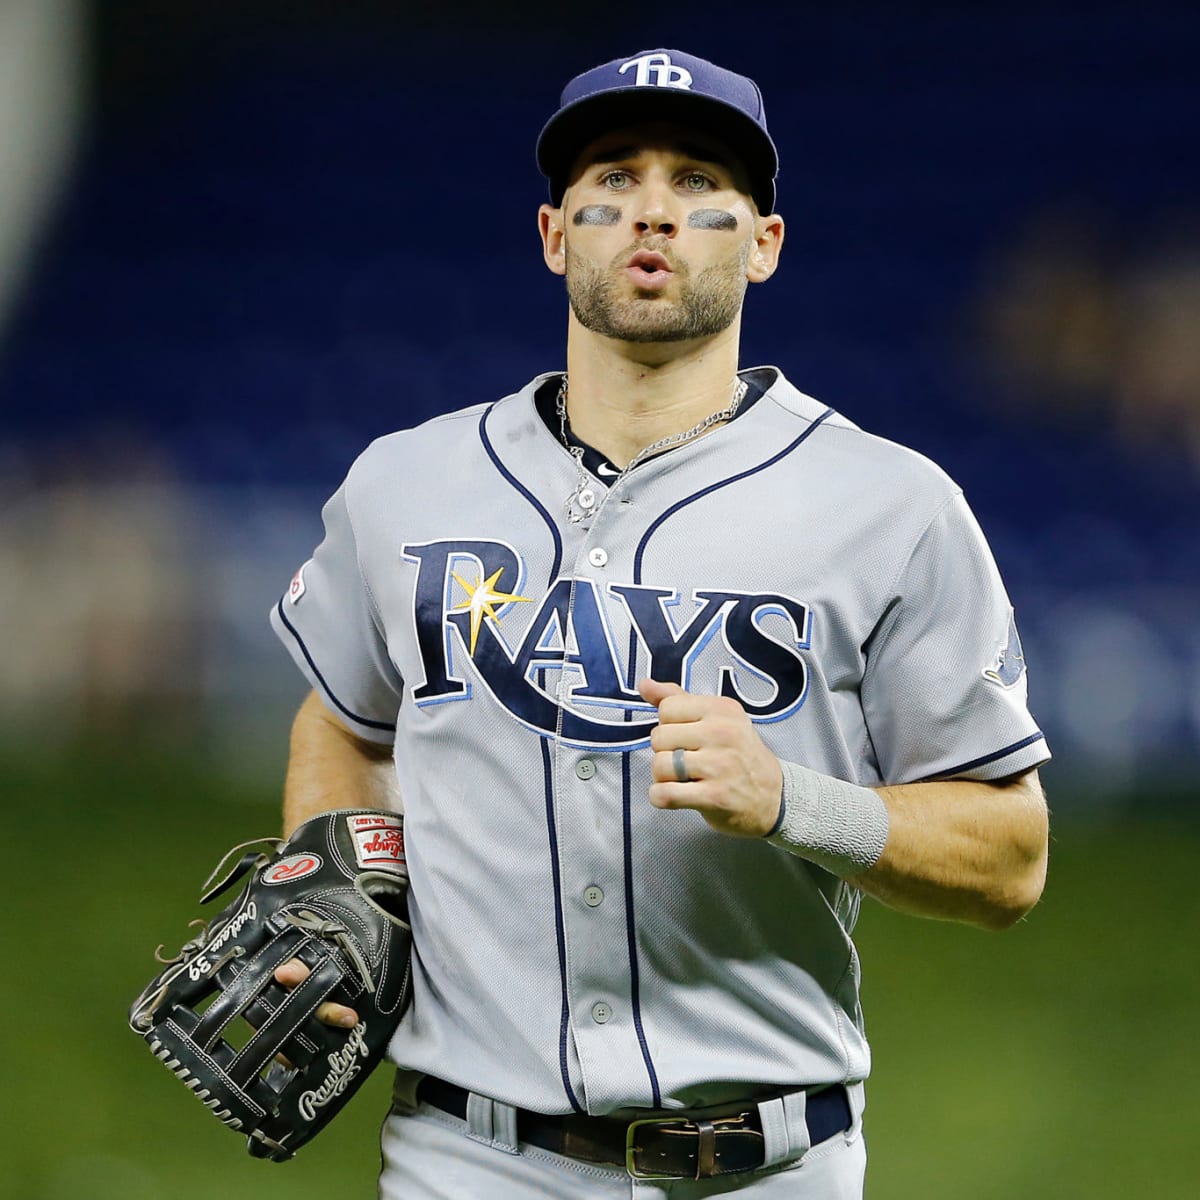 Video: Kevin Kiermaier Just Made MLB's Catch Of The Year - The